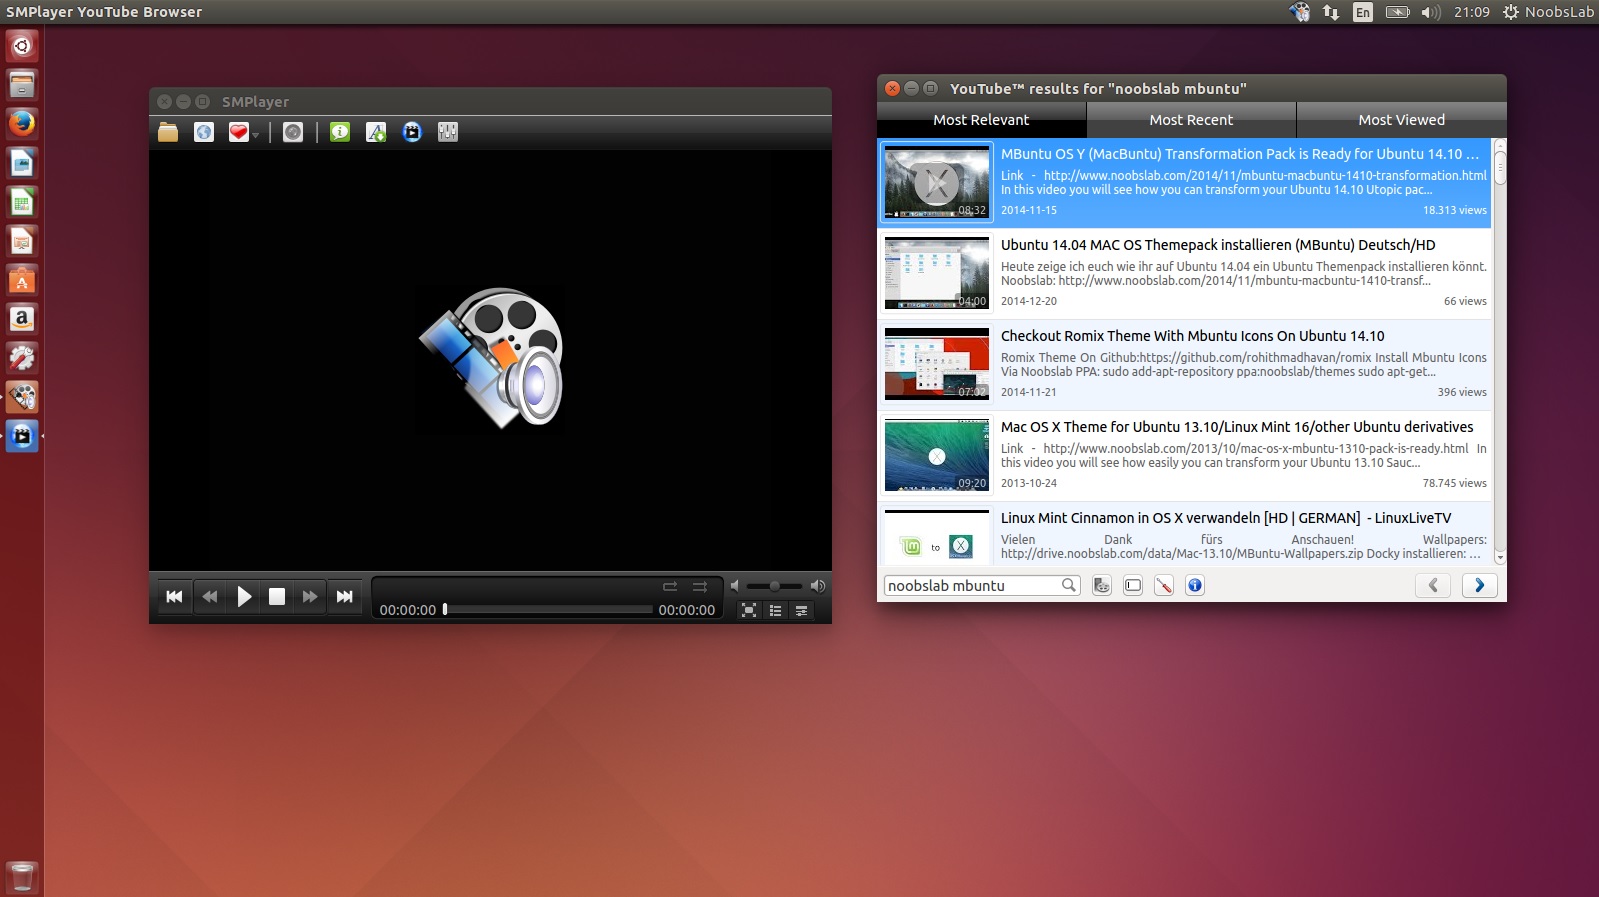 SMPlayer Version 220.220.20 Just Released With Better MPV Support ...